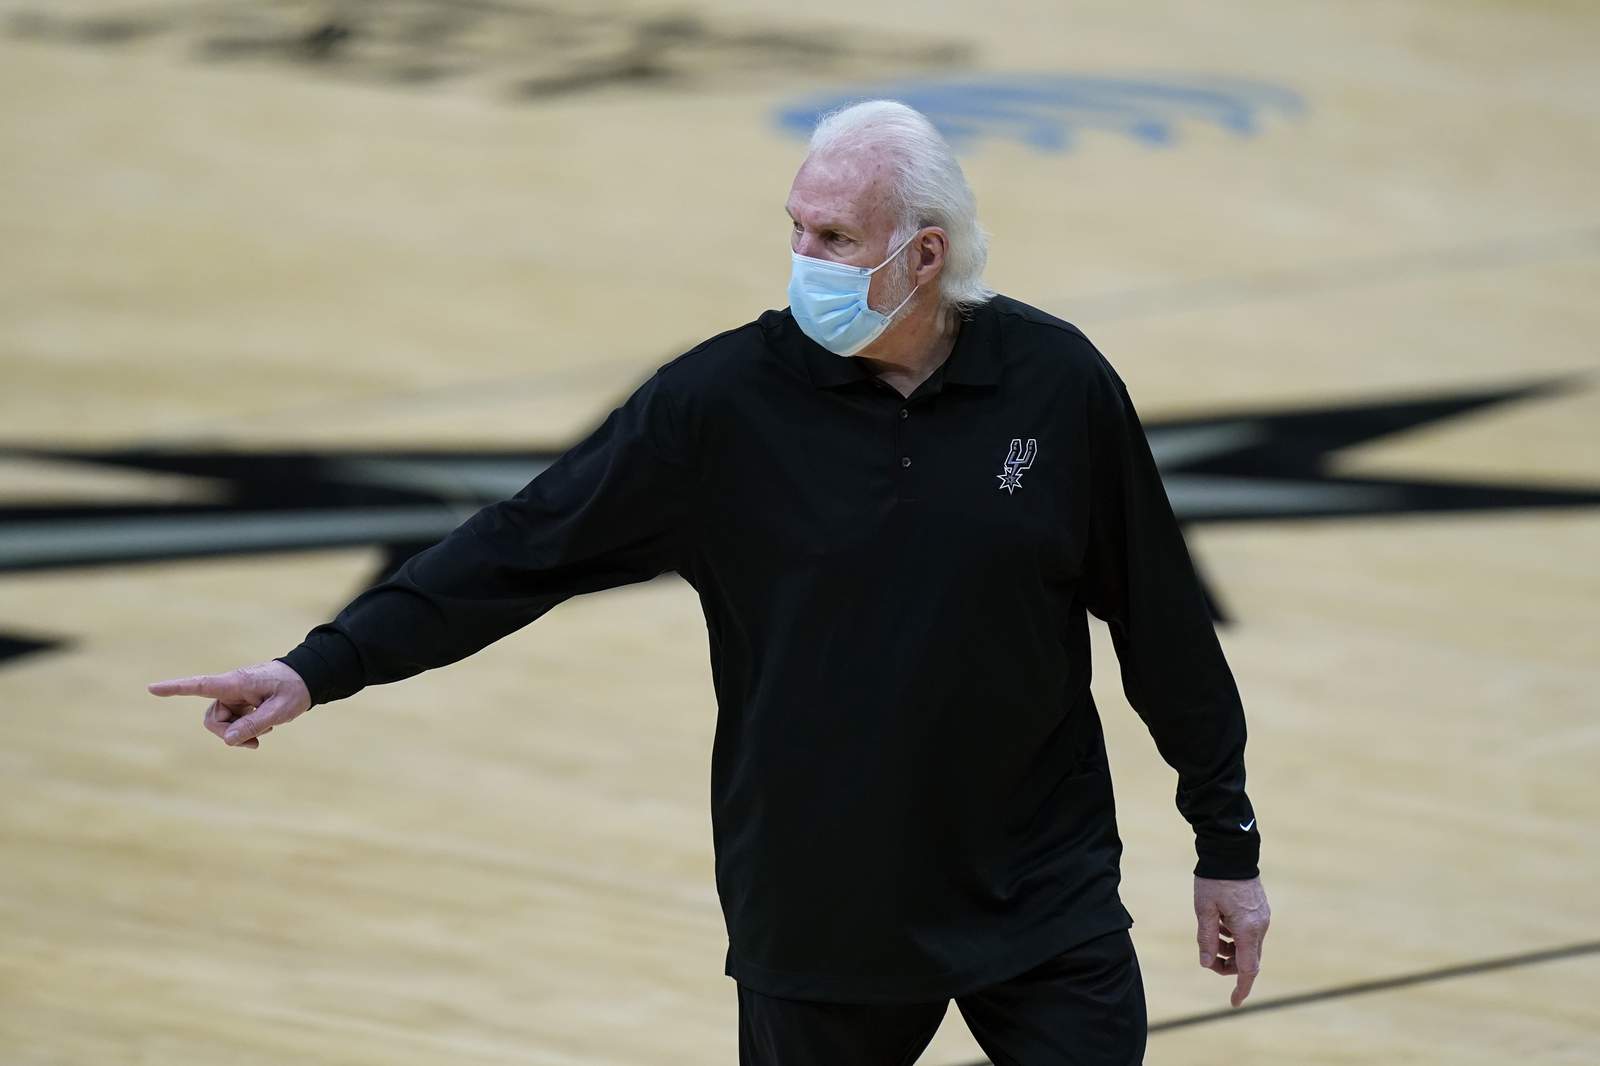 ‘Trump enjoyed it’: Spurs head coach Gregg Popovich blasts president, rioters after attack at US Capitol